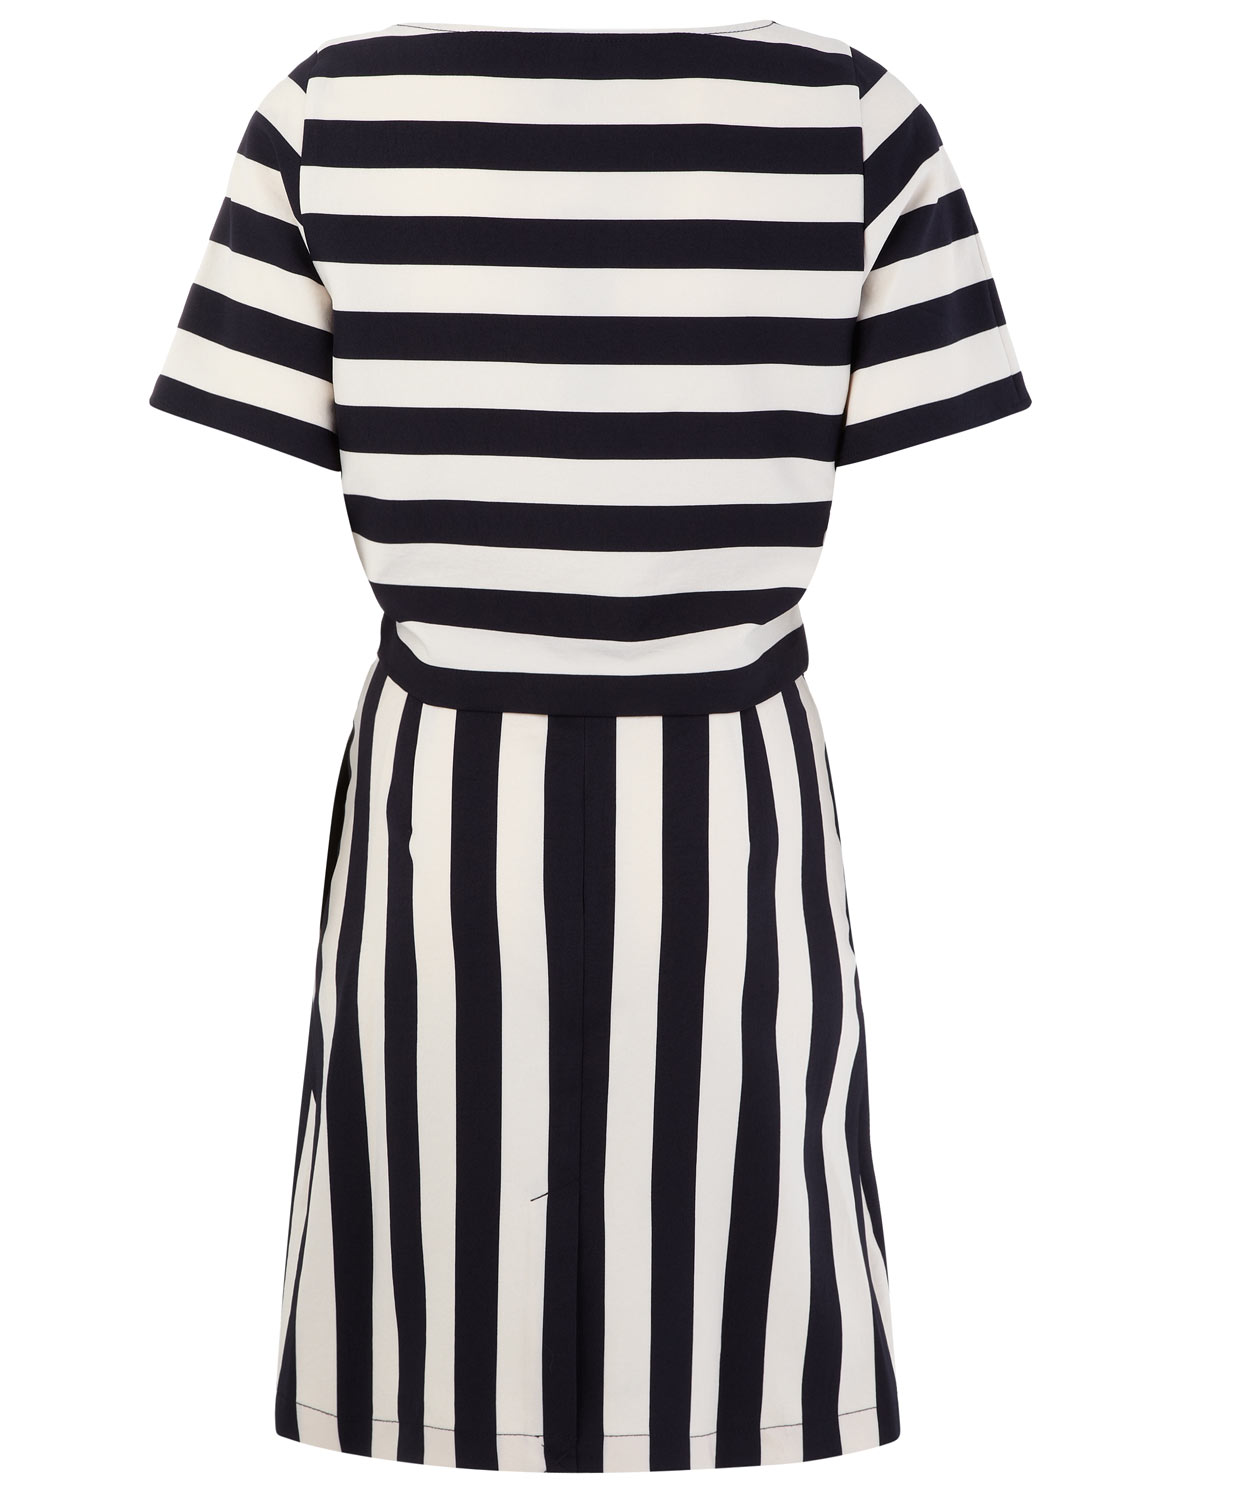 Marc by marc jacobs Navy and Cream Striped Scooter Dress in White | Lyst